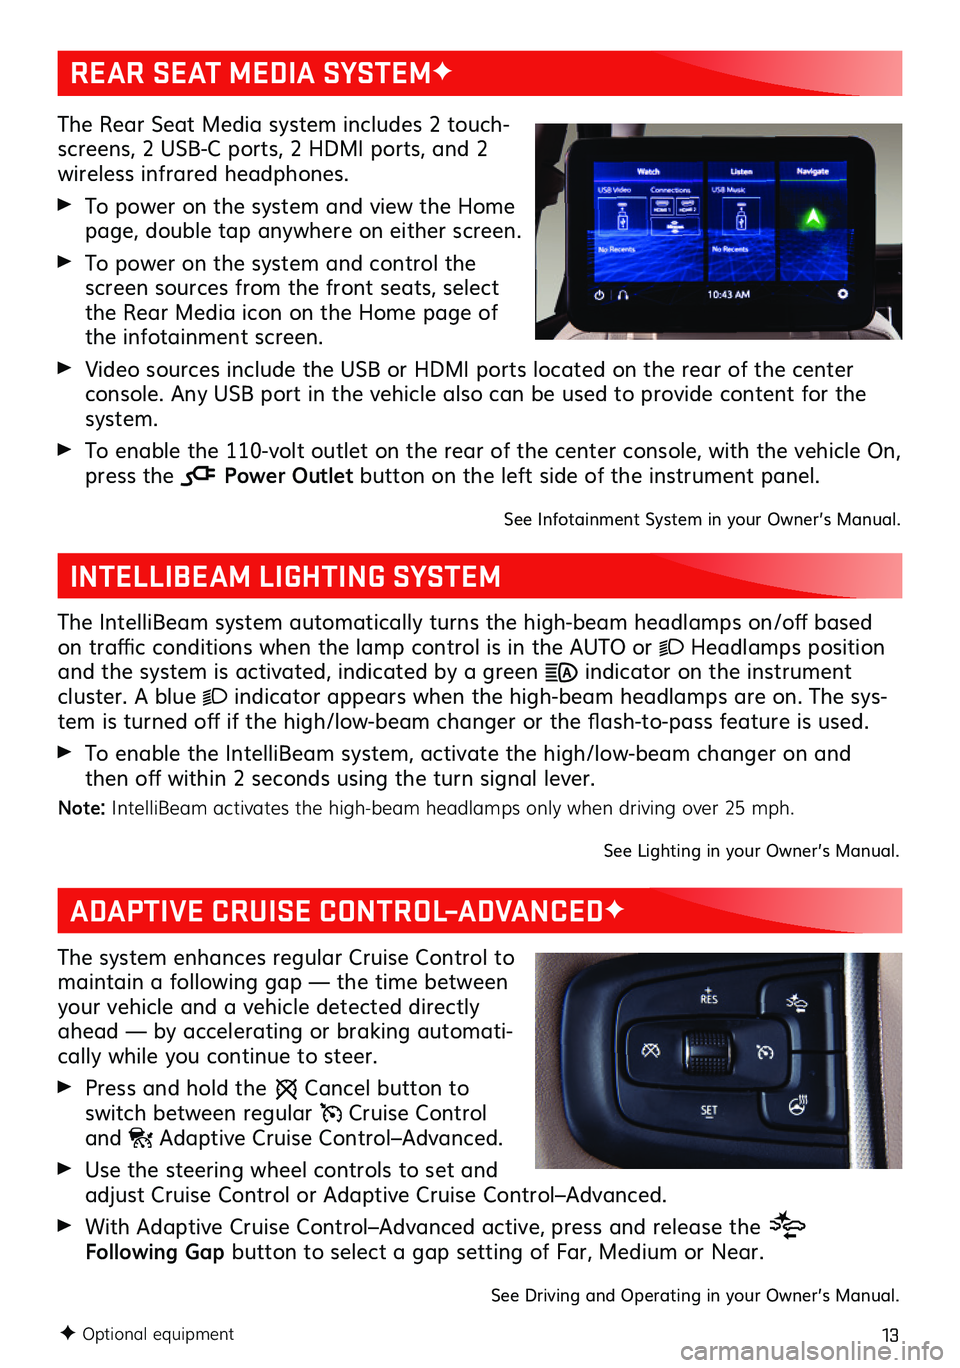 GMC YUKON 2021  Get To Know Guide 13
The Rear Seat Media system includes 2 touch-screens, 2 USB-C ports, 2 HDMI ports, and 2 wireless infrared headphones.
 To power on the system and view the Home page, double tap anywhere on either s